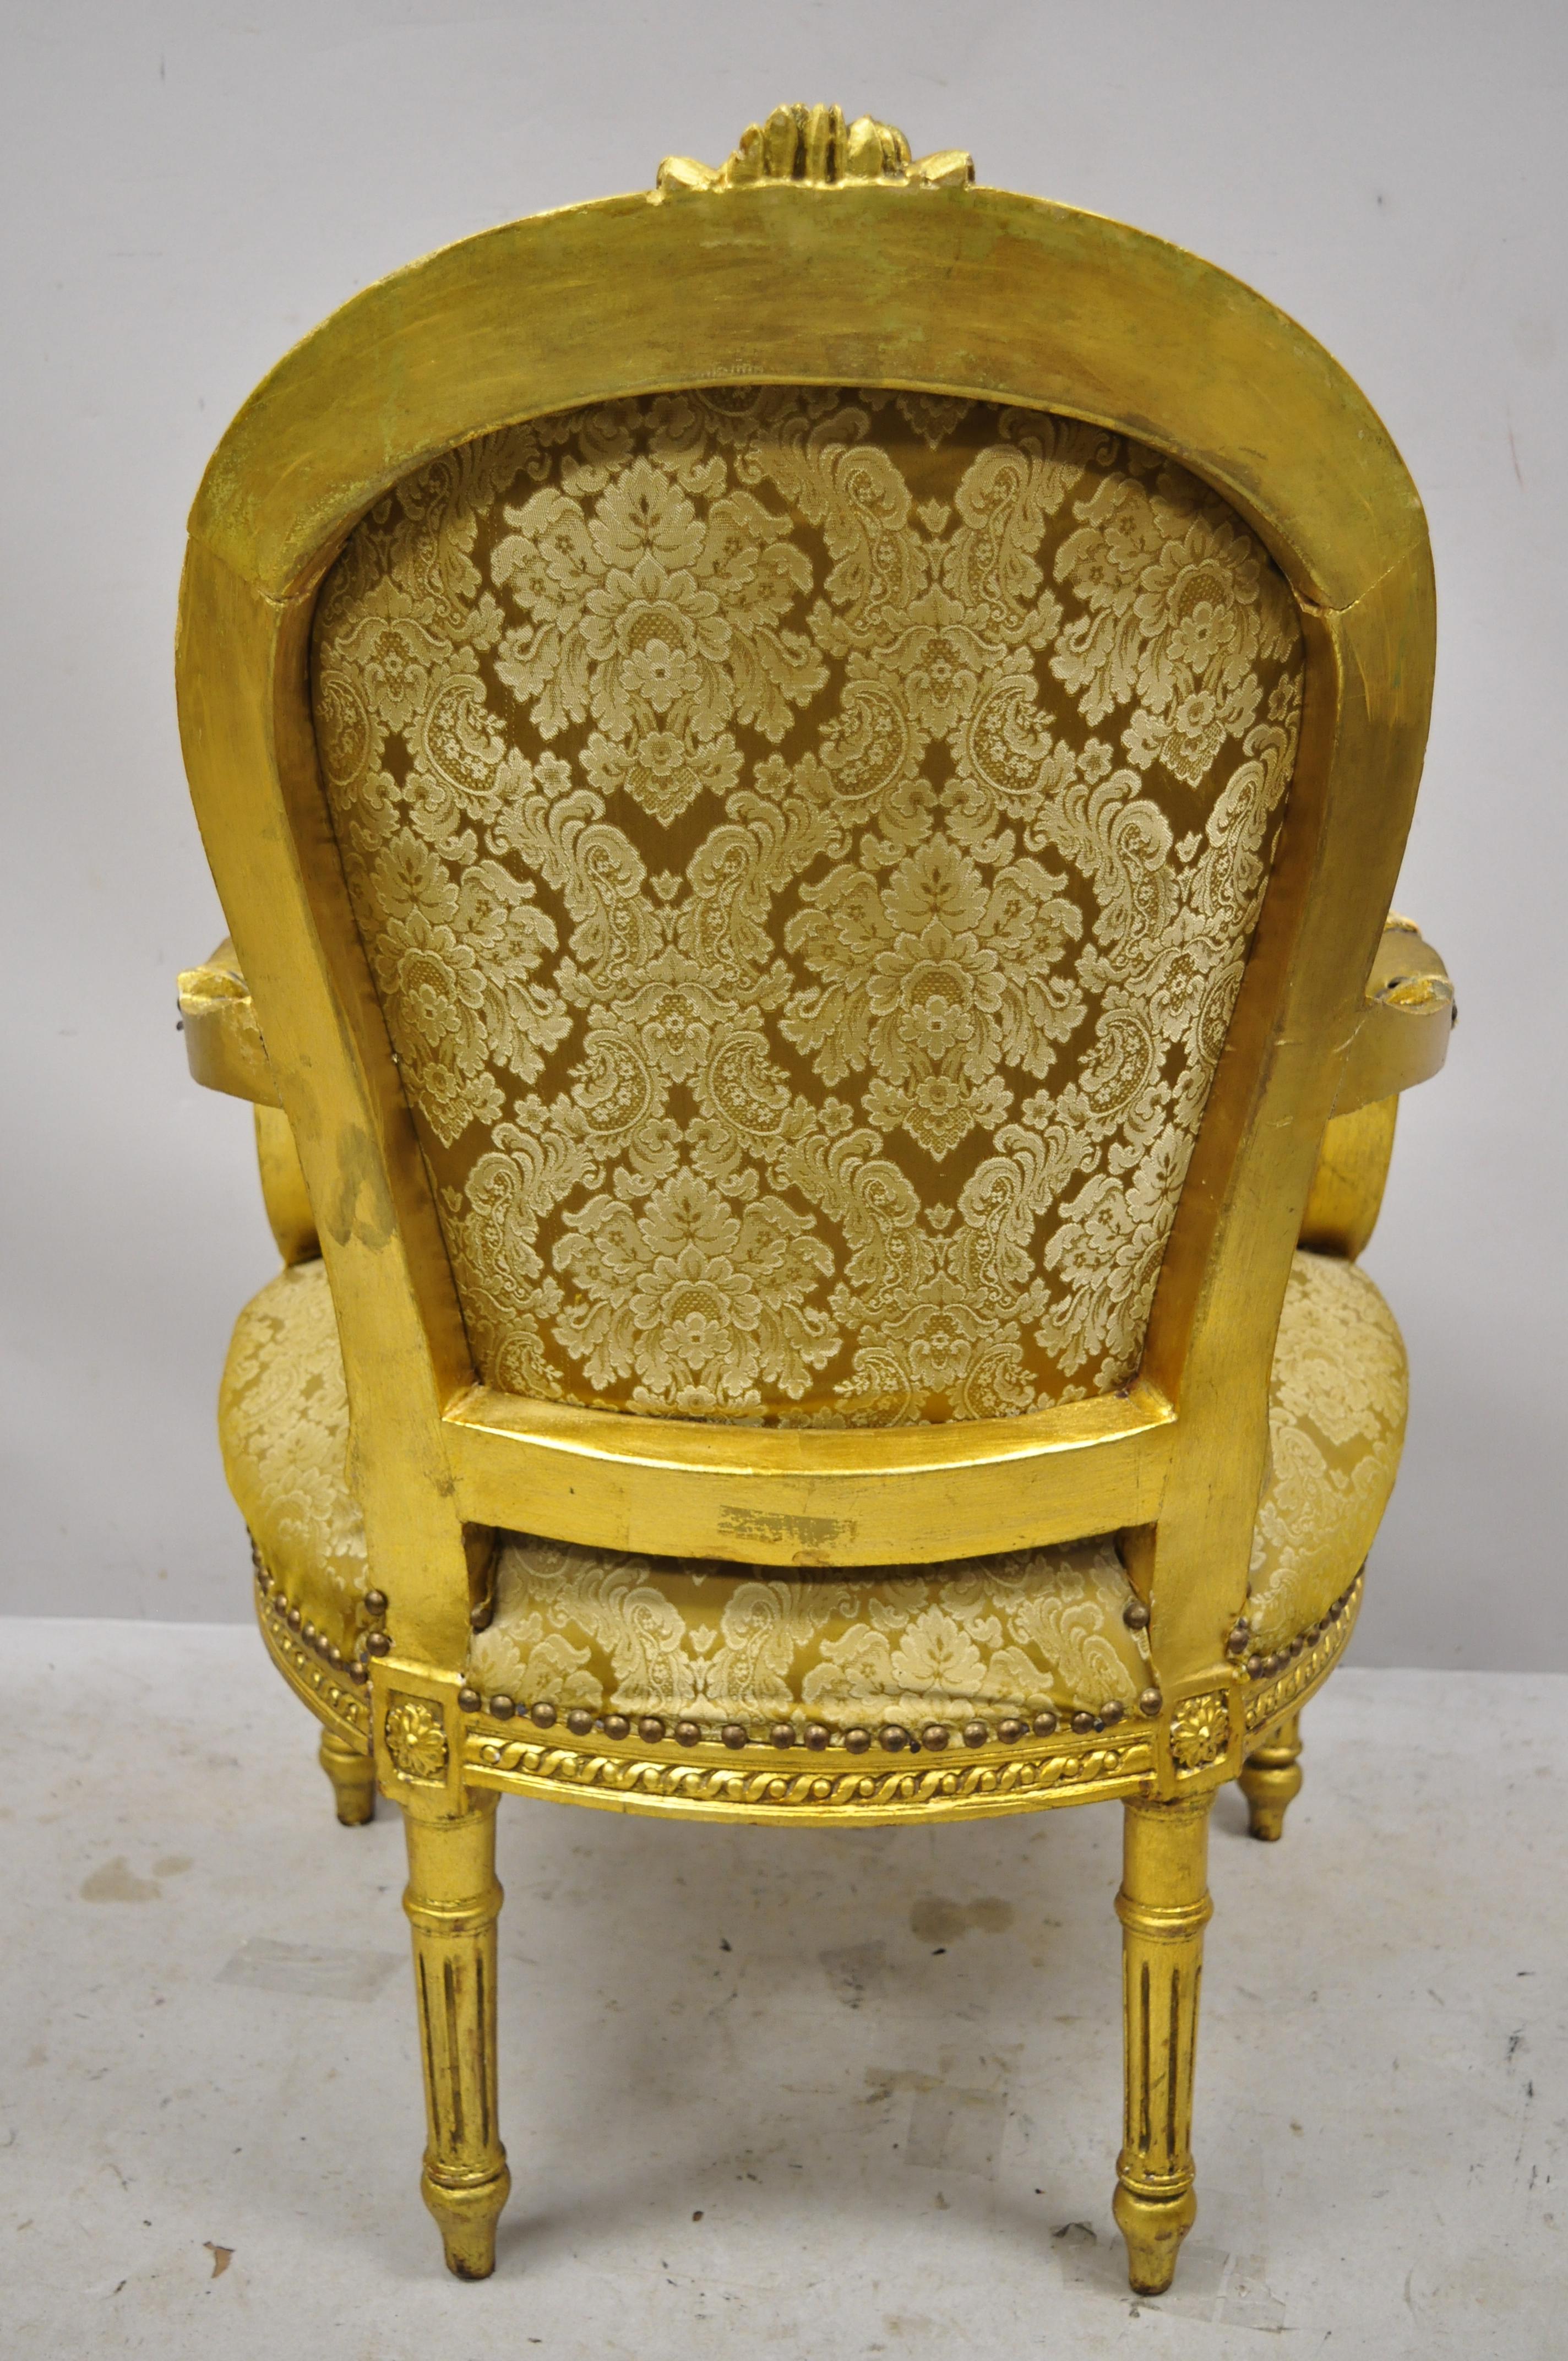 Vintage French Louis XVI Gold Leaf Balloon Back Fauteuil Armchairs, a Pair For Sale 2